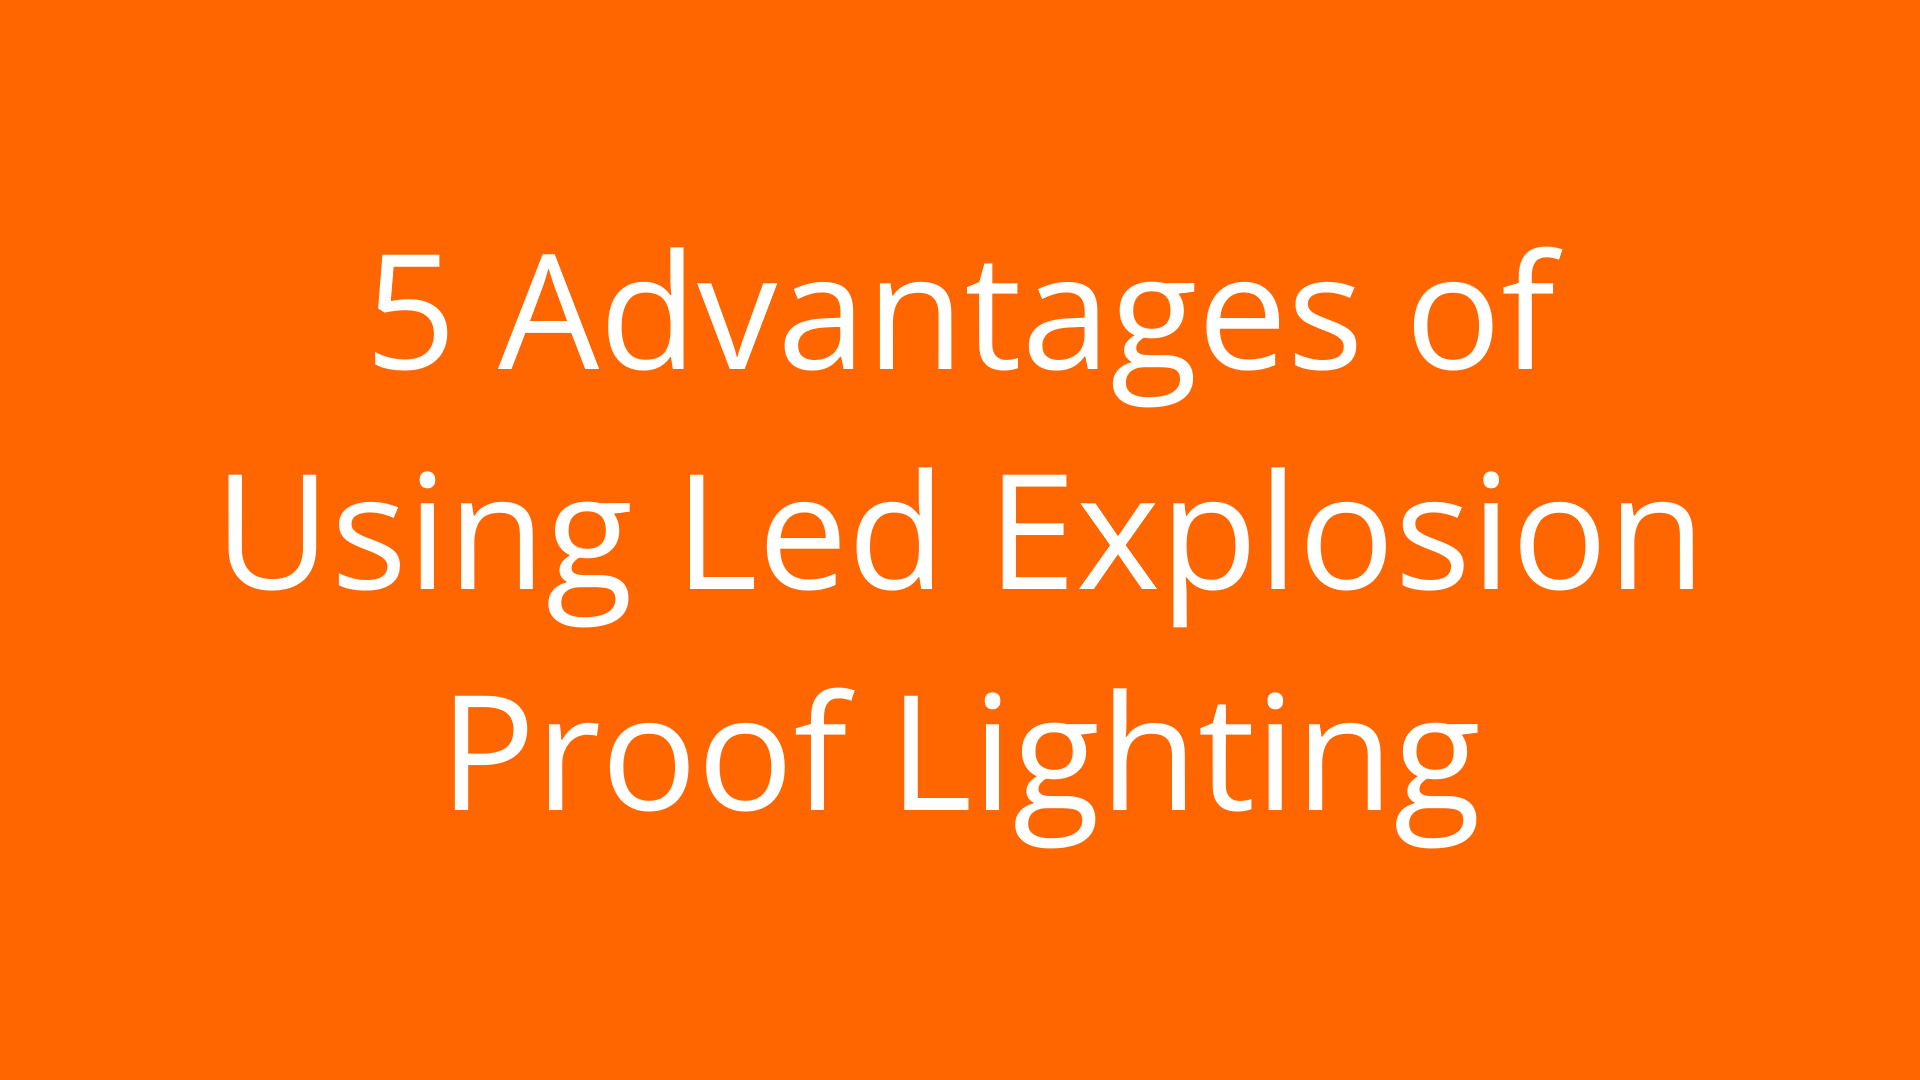 5 Advantages of Using Led Explosion Proof Lighting